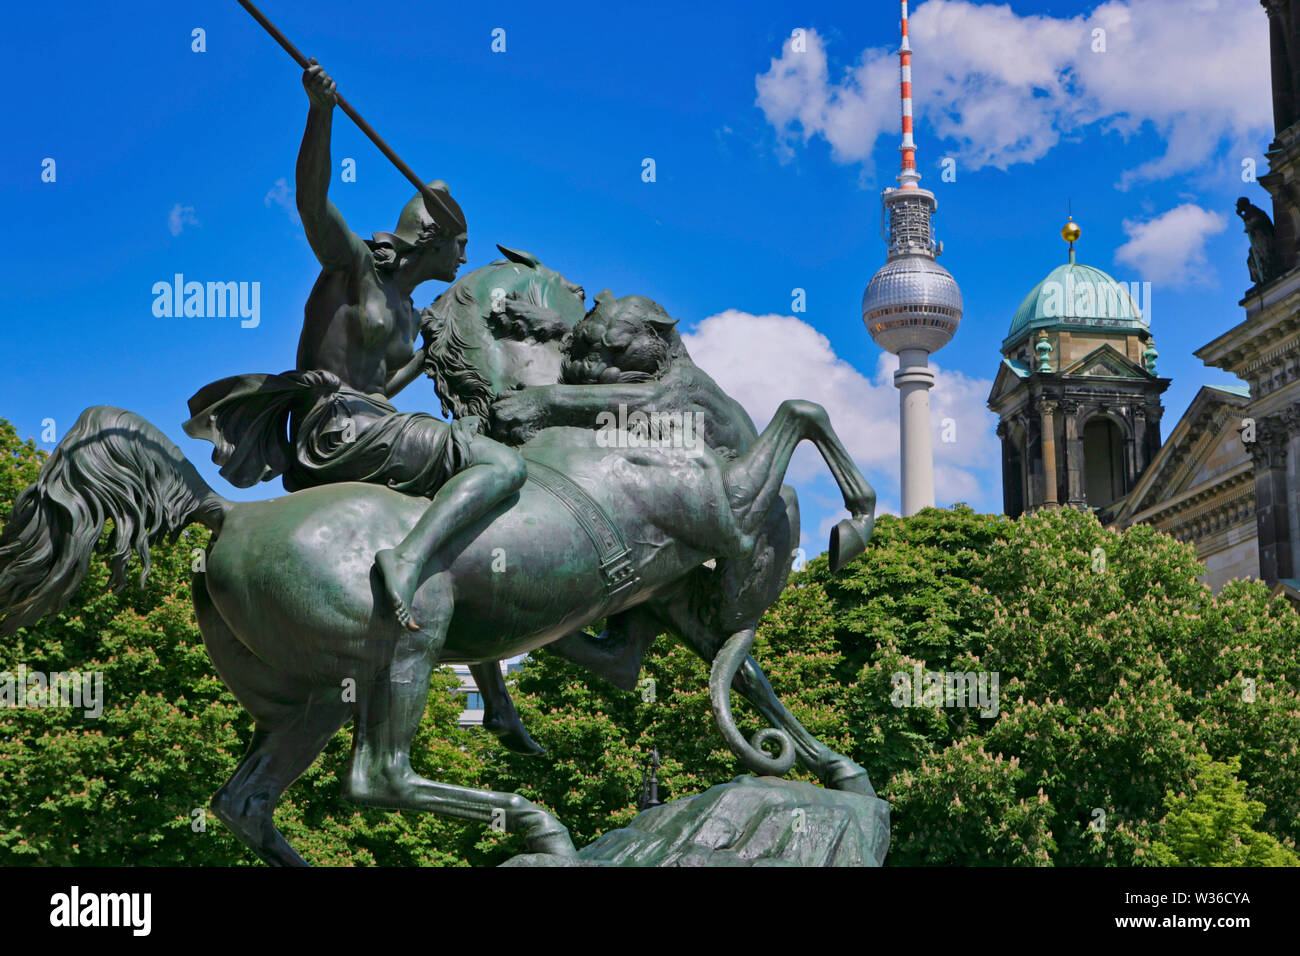 Amazon Statue High Resolution Stock Photography and Images - Alamy